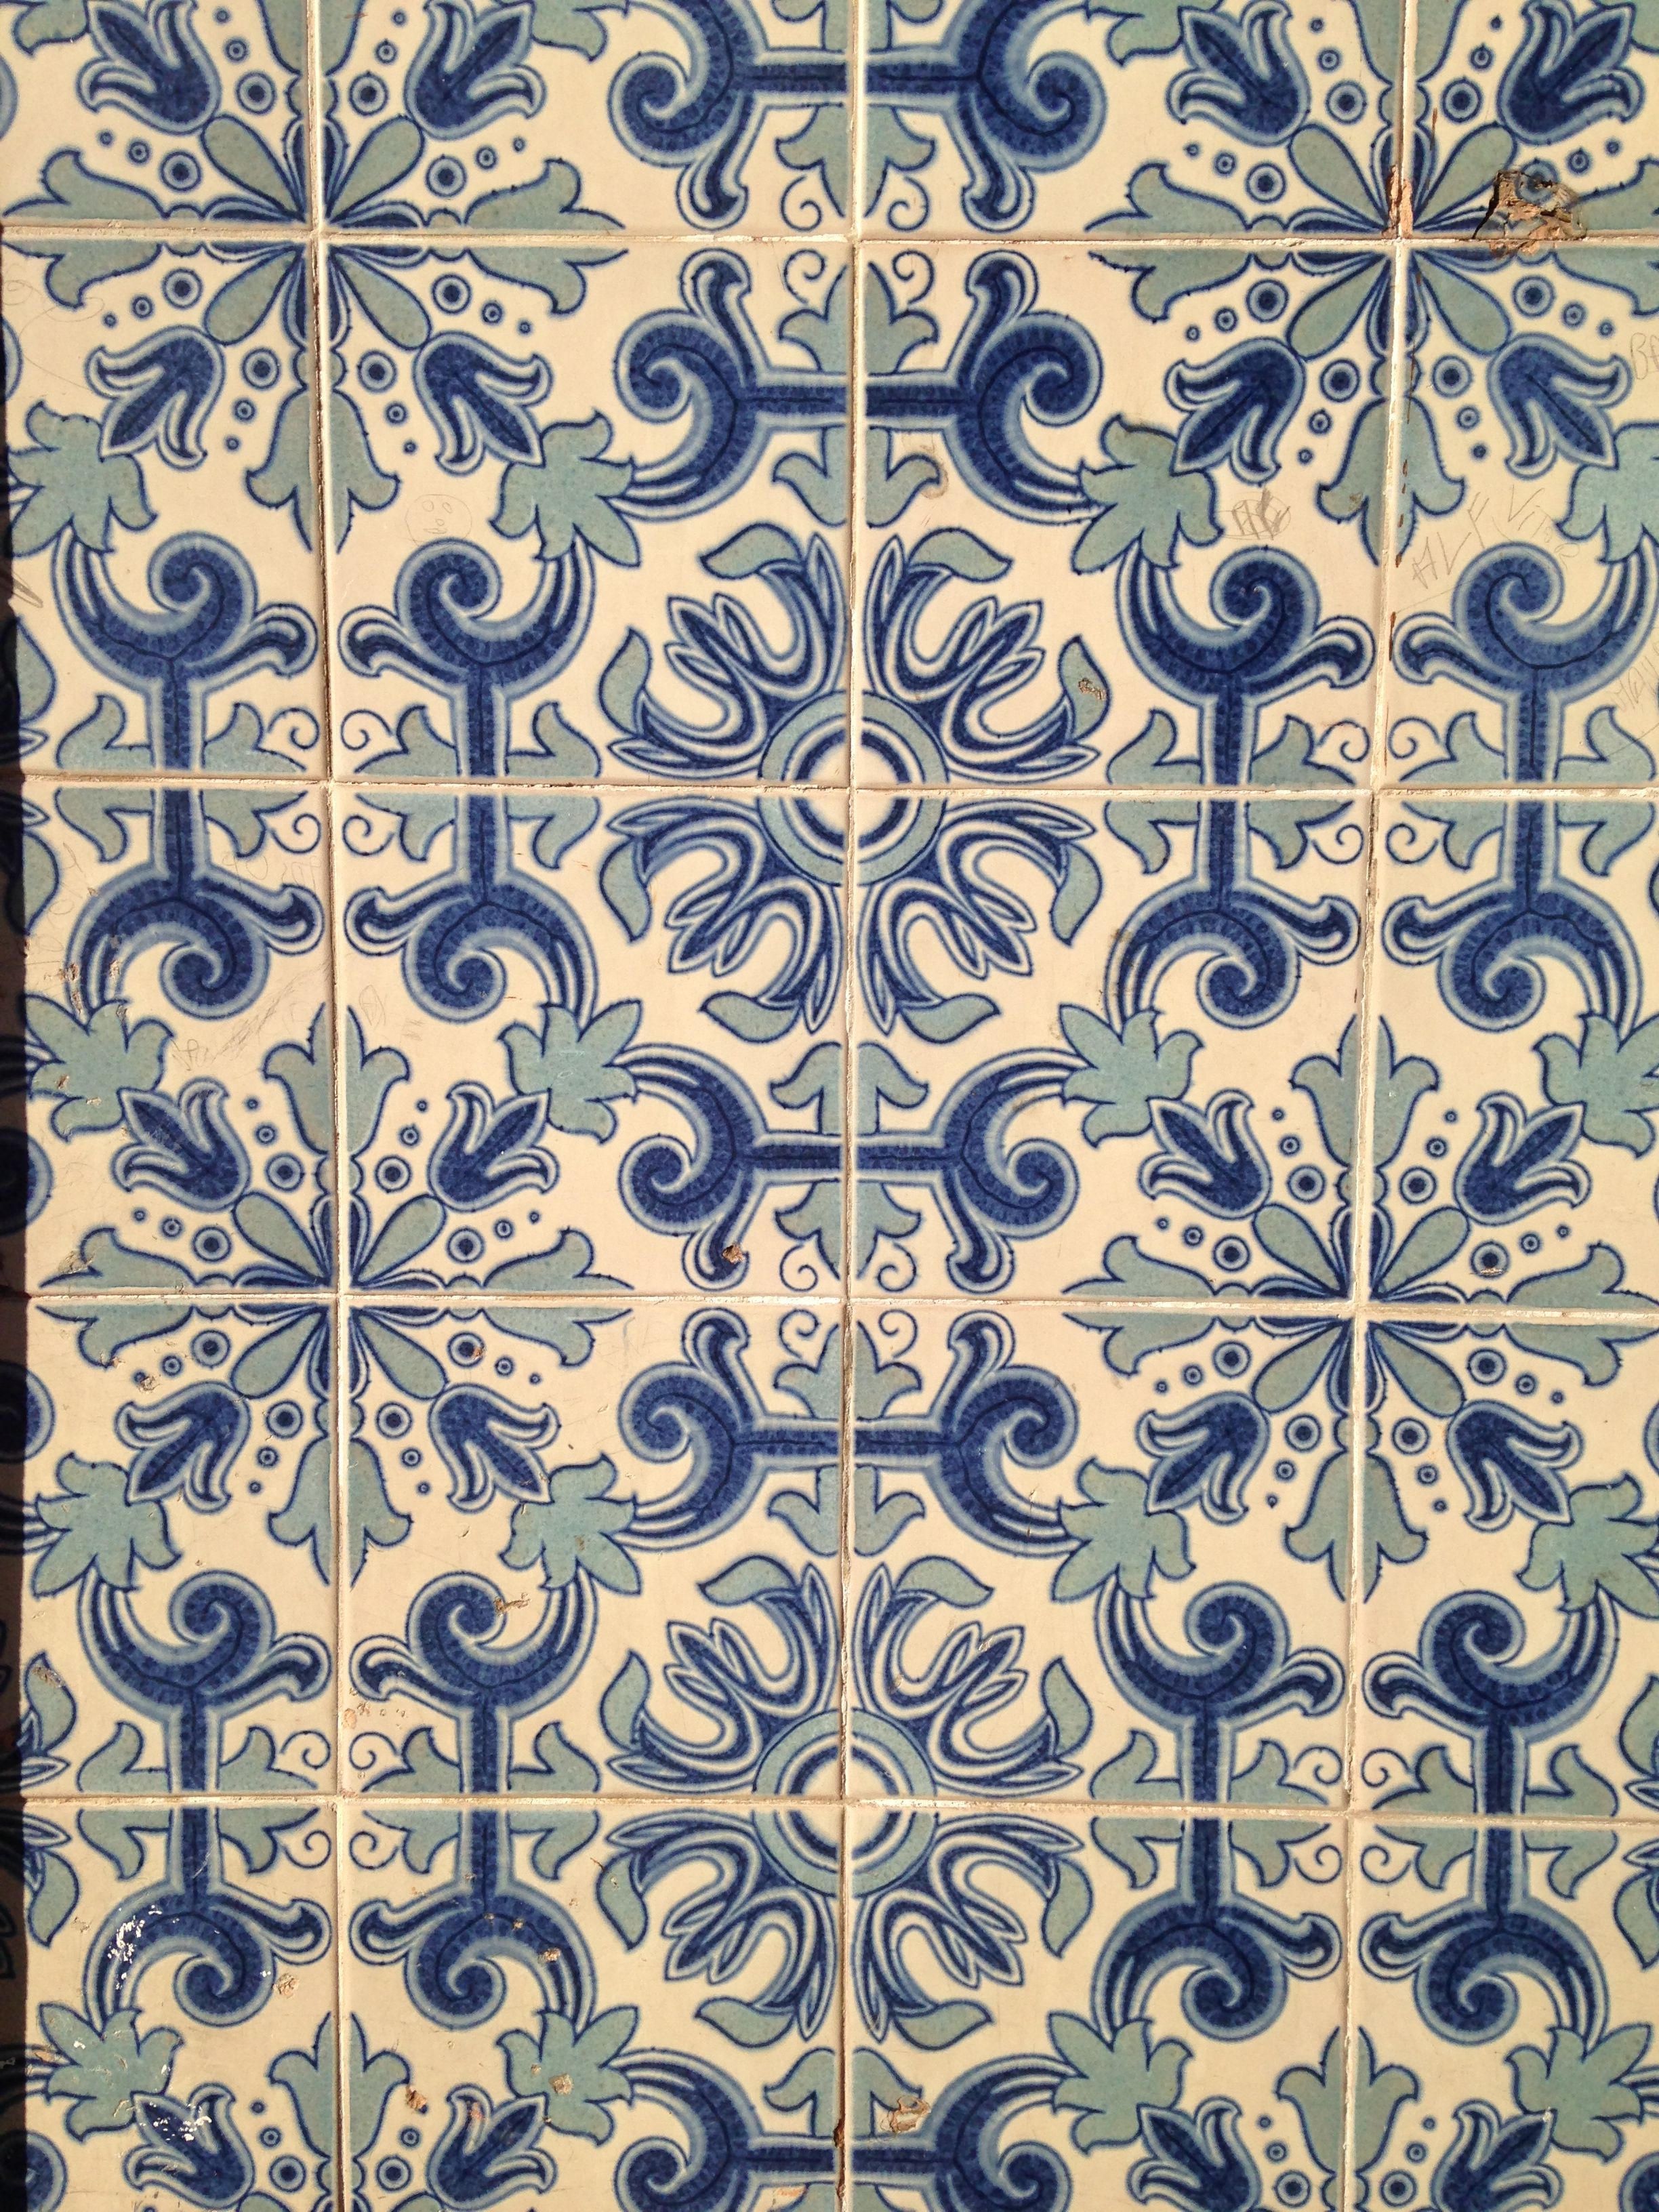 Portuguese tiles wallpaper for your iPhone. tiles、patchwork